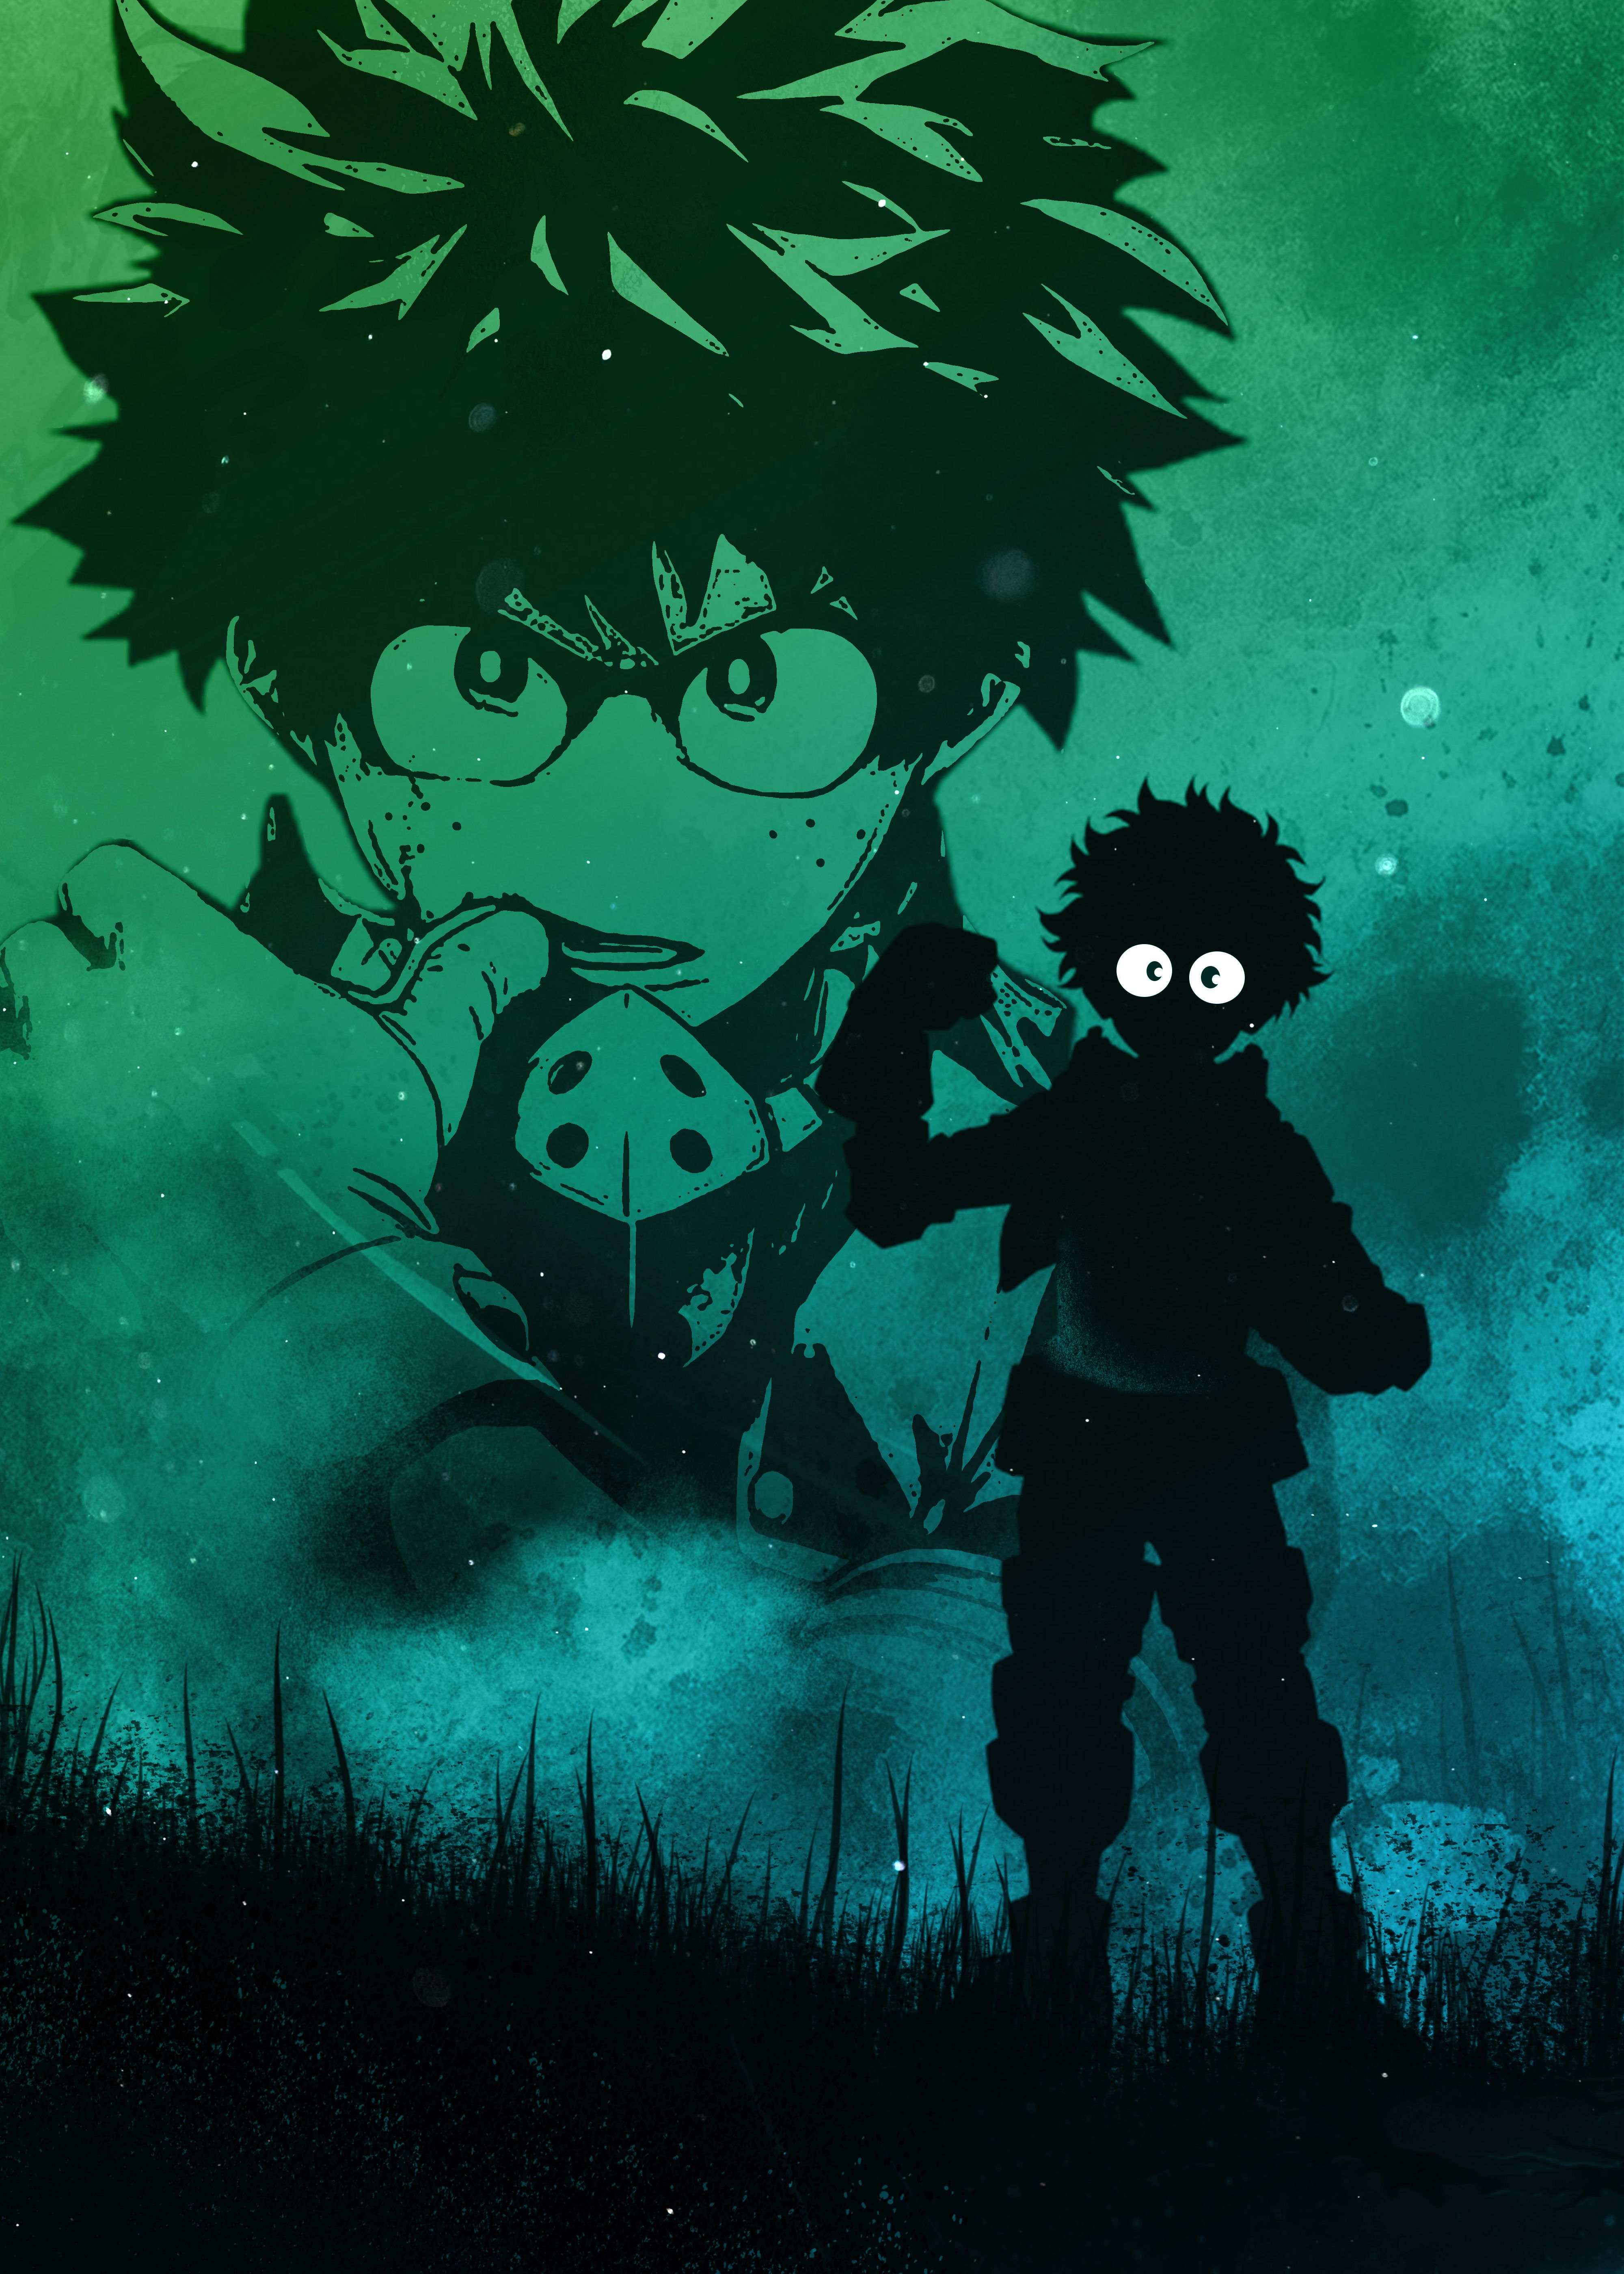 A green and blue wallpaper of a silhouette of a young boy with spiky hair holding a gun with a pig behind him - Deku